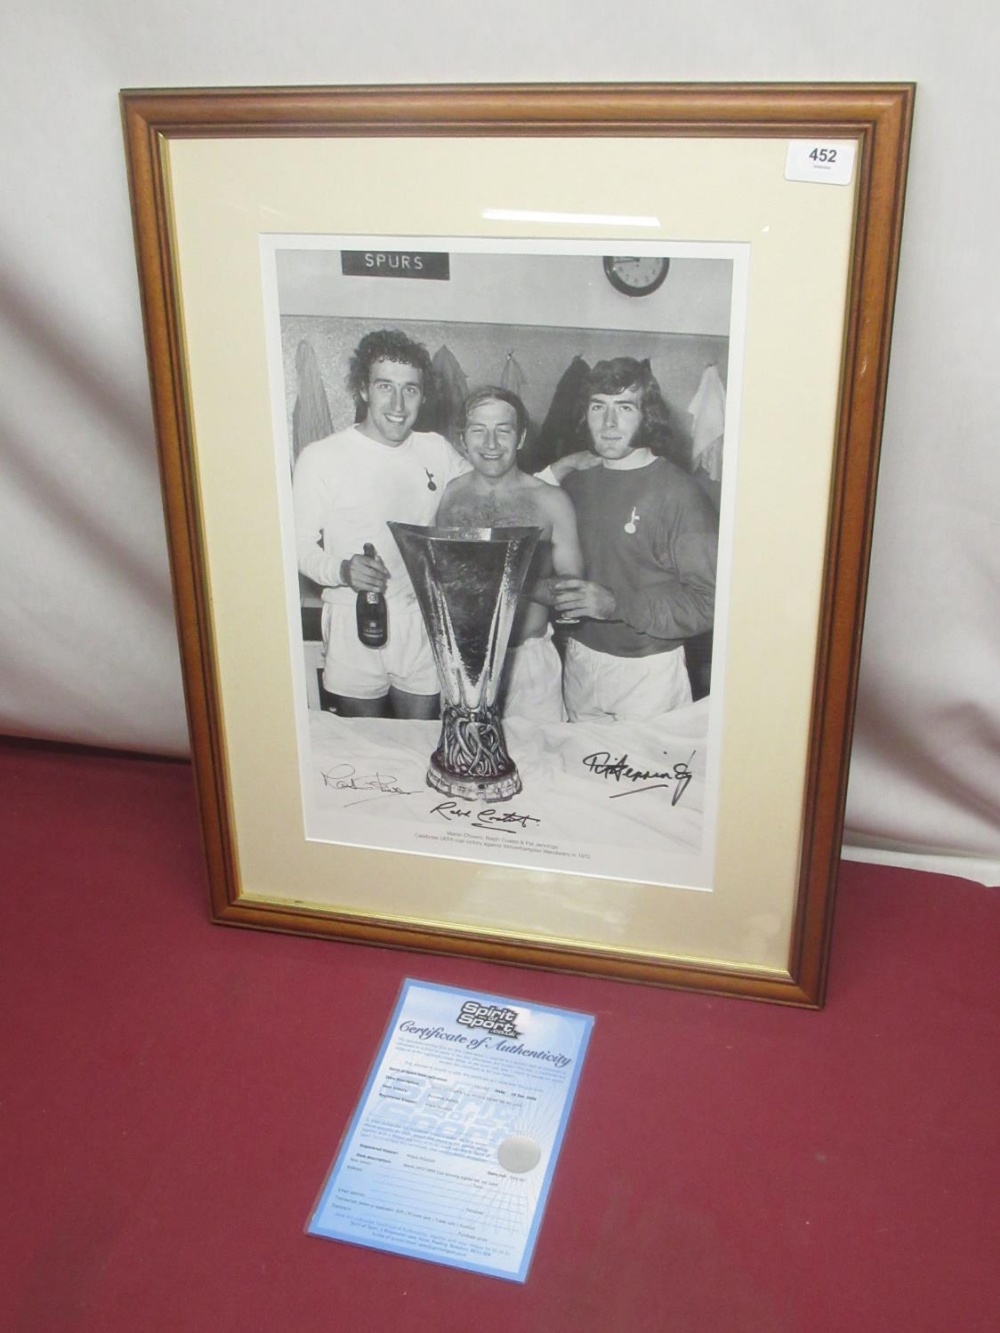 1972 UEFA Cup Winners Signed Limited Edition Print- Martin Chivers, Ralph Coats and Pat Jennings